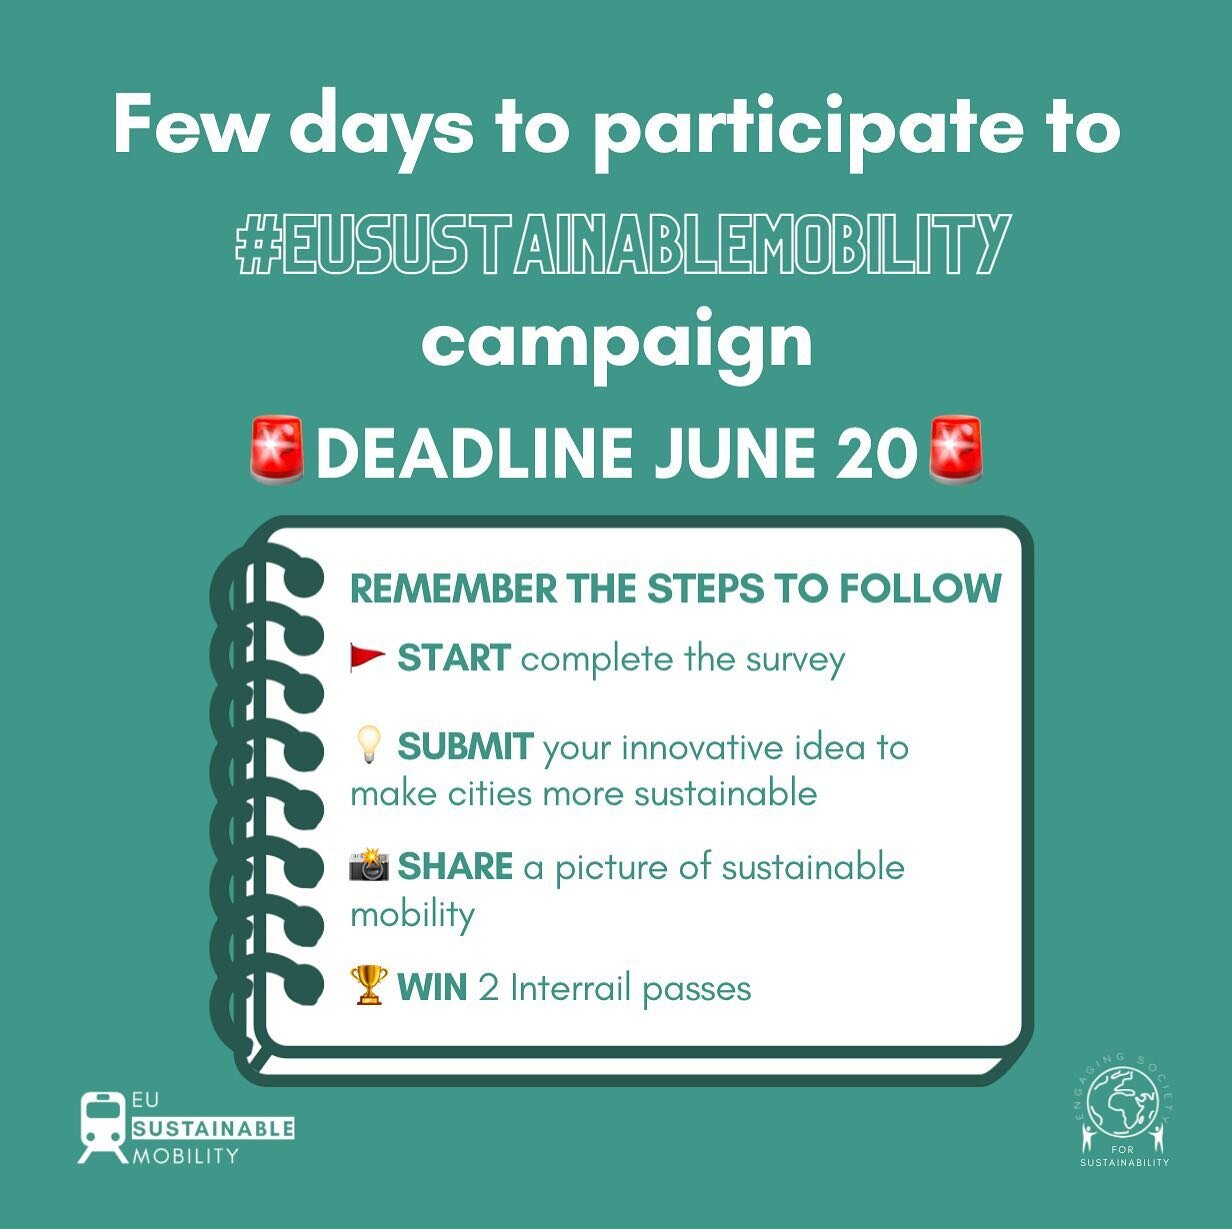 🚨Only few days left to participate to our #EUSustainableMobility campaign! Complete these 4 simple steps by June 20 and support us in making #mobility more sustainable across in Europe. 🚄
The winners will be announced at the ES4S Awarding event on 